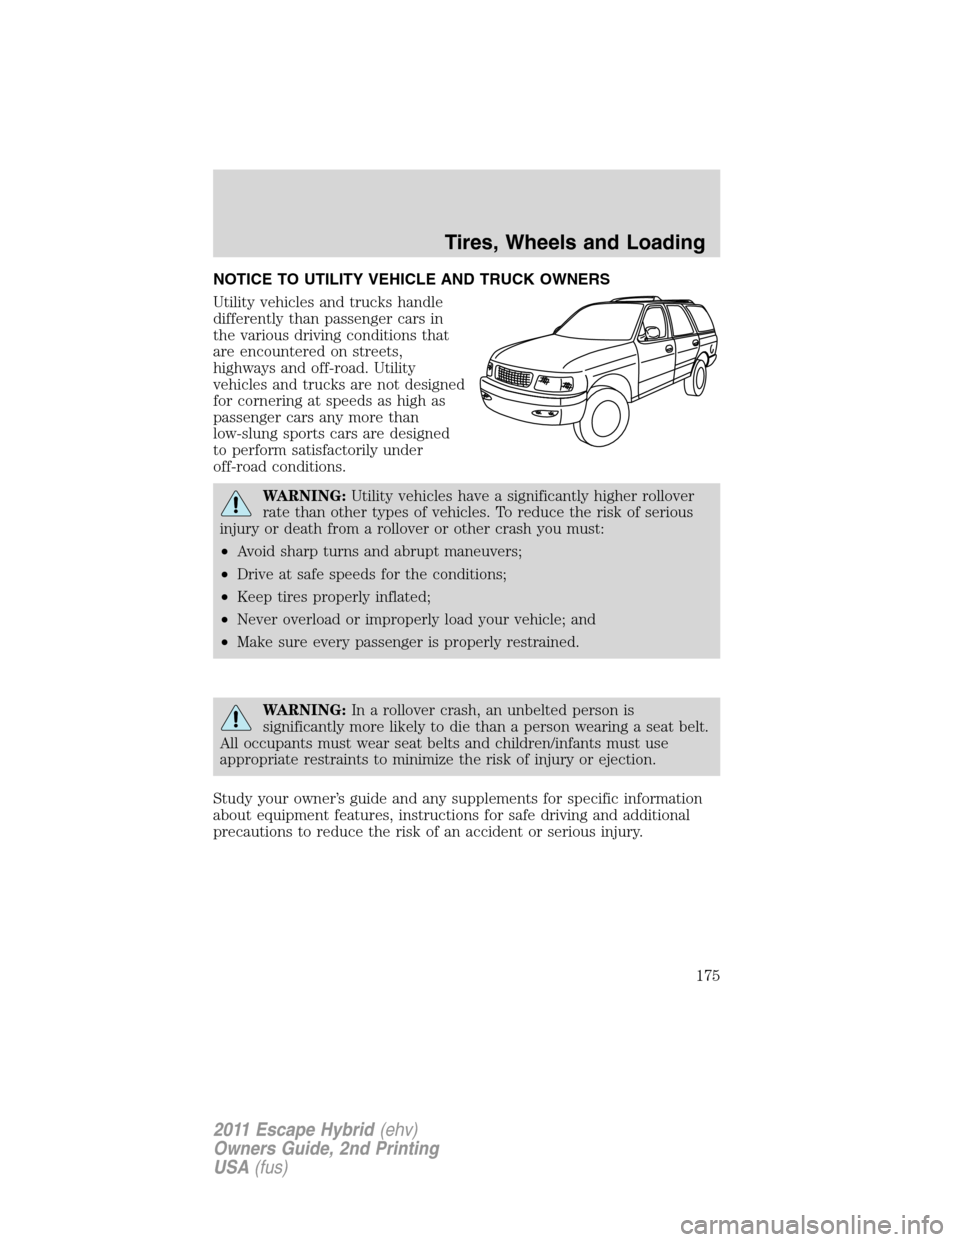 FORD ESCAPE HYBRID 2011 2.G Owners Manual NOTICE TO UTILITY VEHICLE AND TRUCK OWNERS
Utility vehicles and trucks handle
differently than passenger cars in
the various driving conditions that
are encountered on streets,
highways and off-road. 